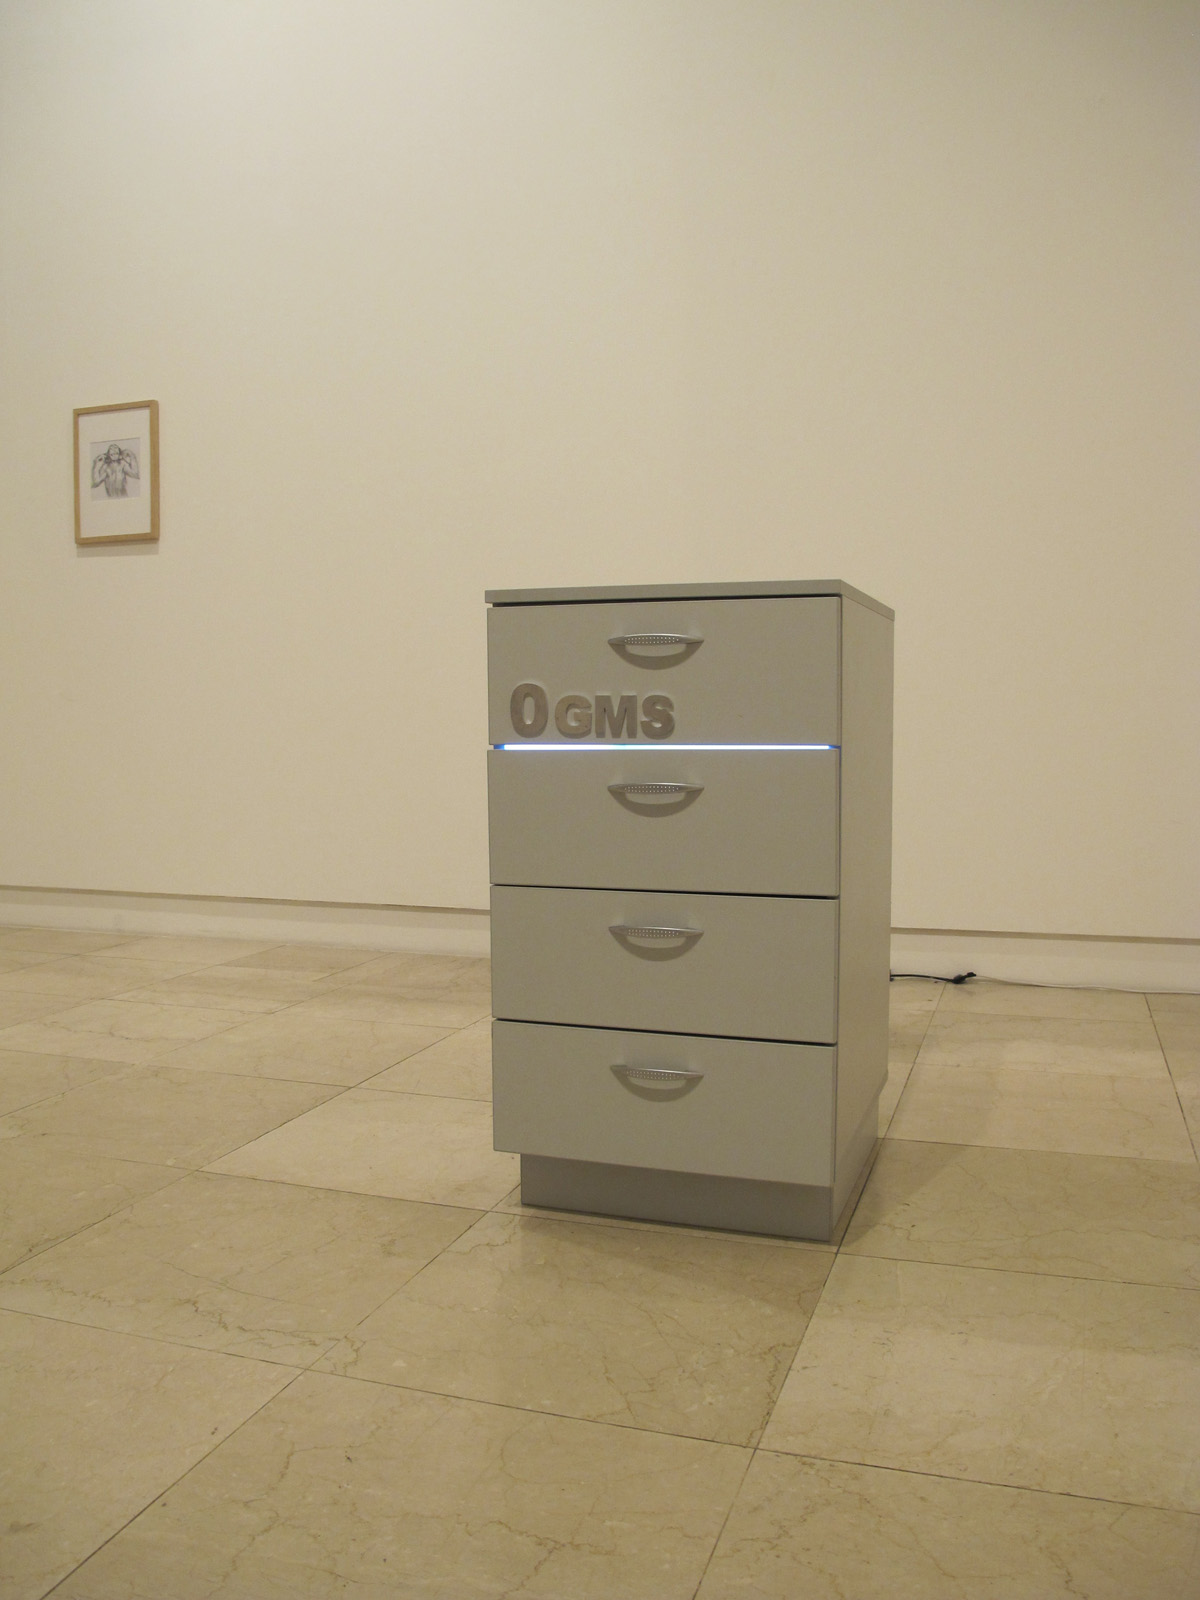 0gms Cabinet 1, 2011. Installation view, Hilger Contemporary, Vienna.